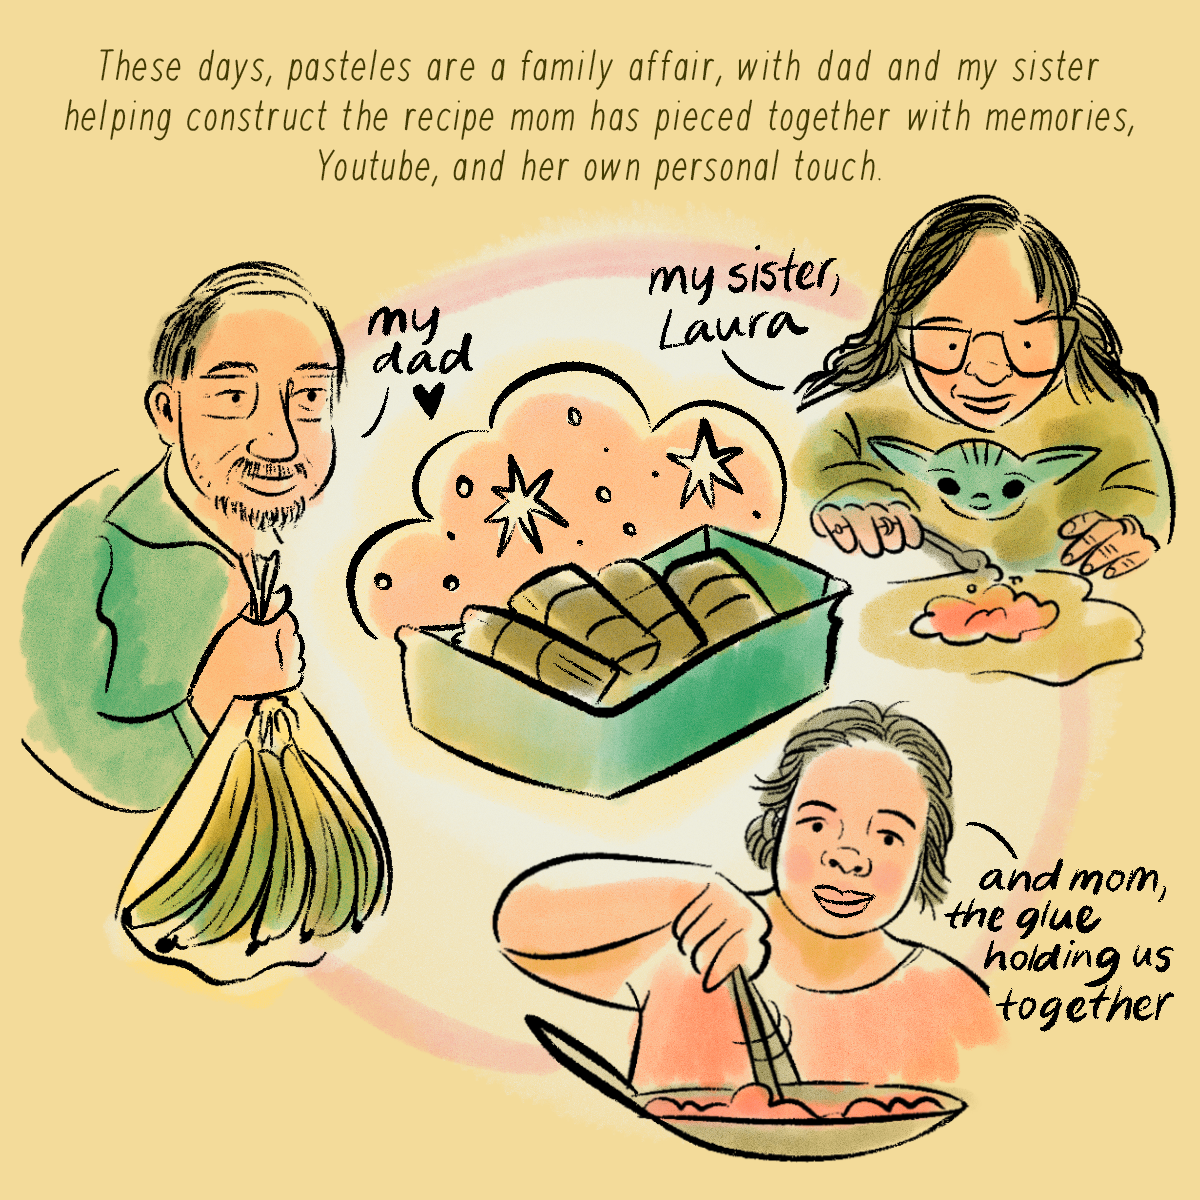 These days, pasteles are a family affair, helping construct the recipe mom has pieced together with memories and Youtube. 